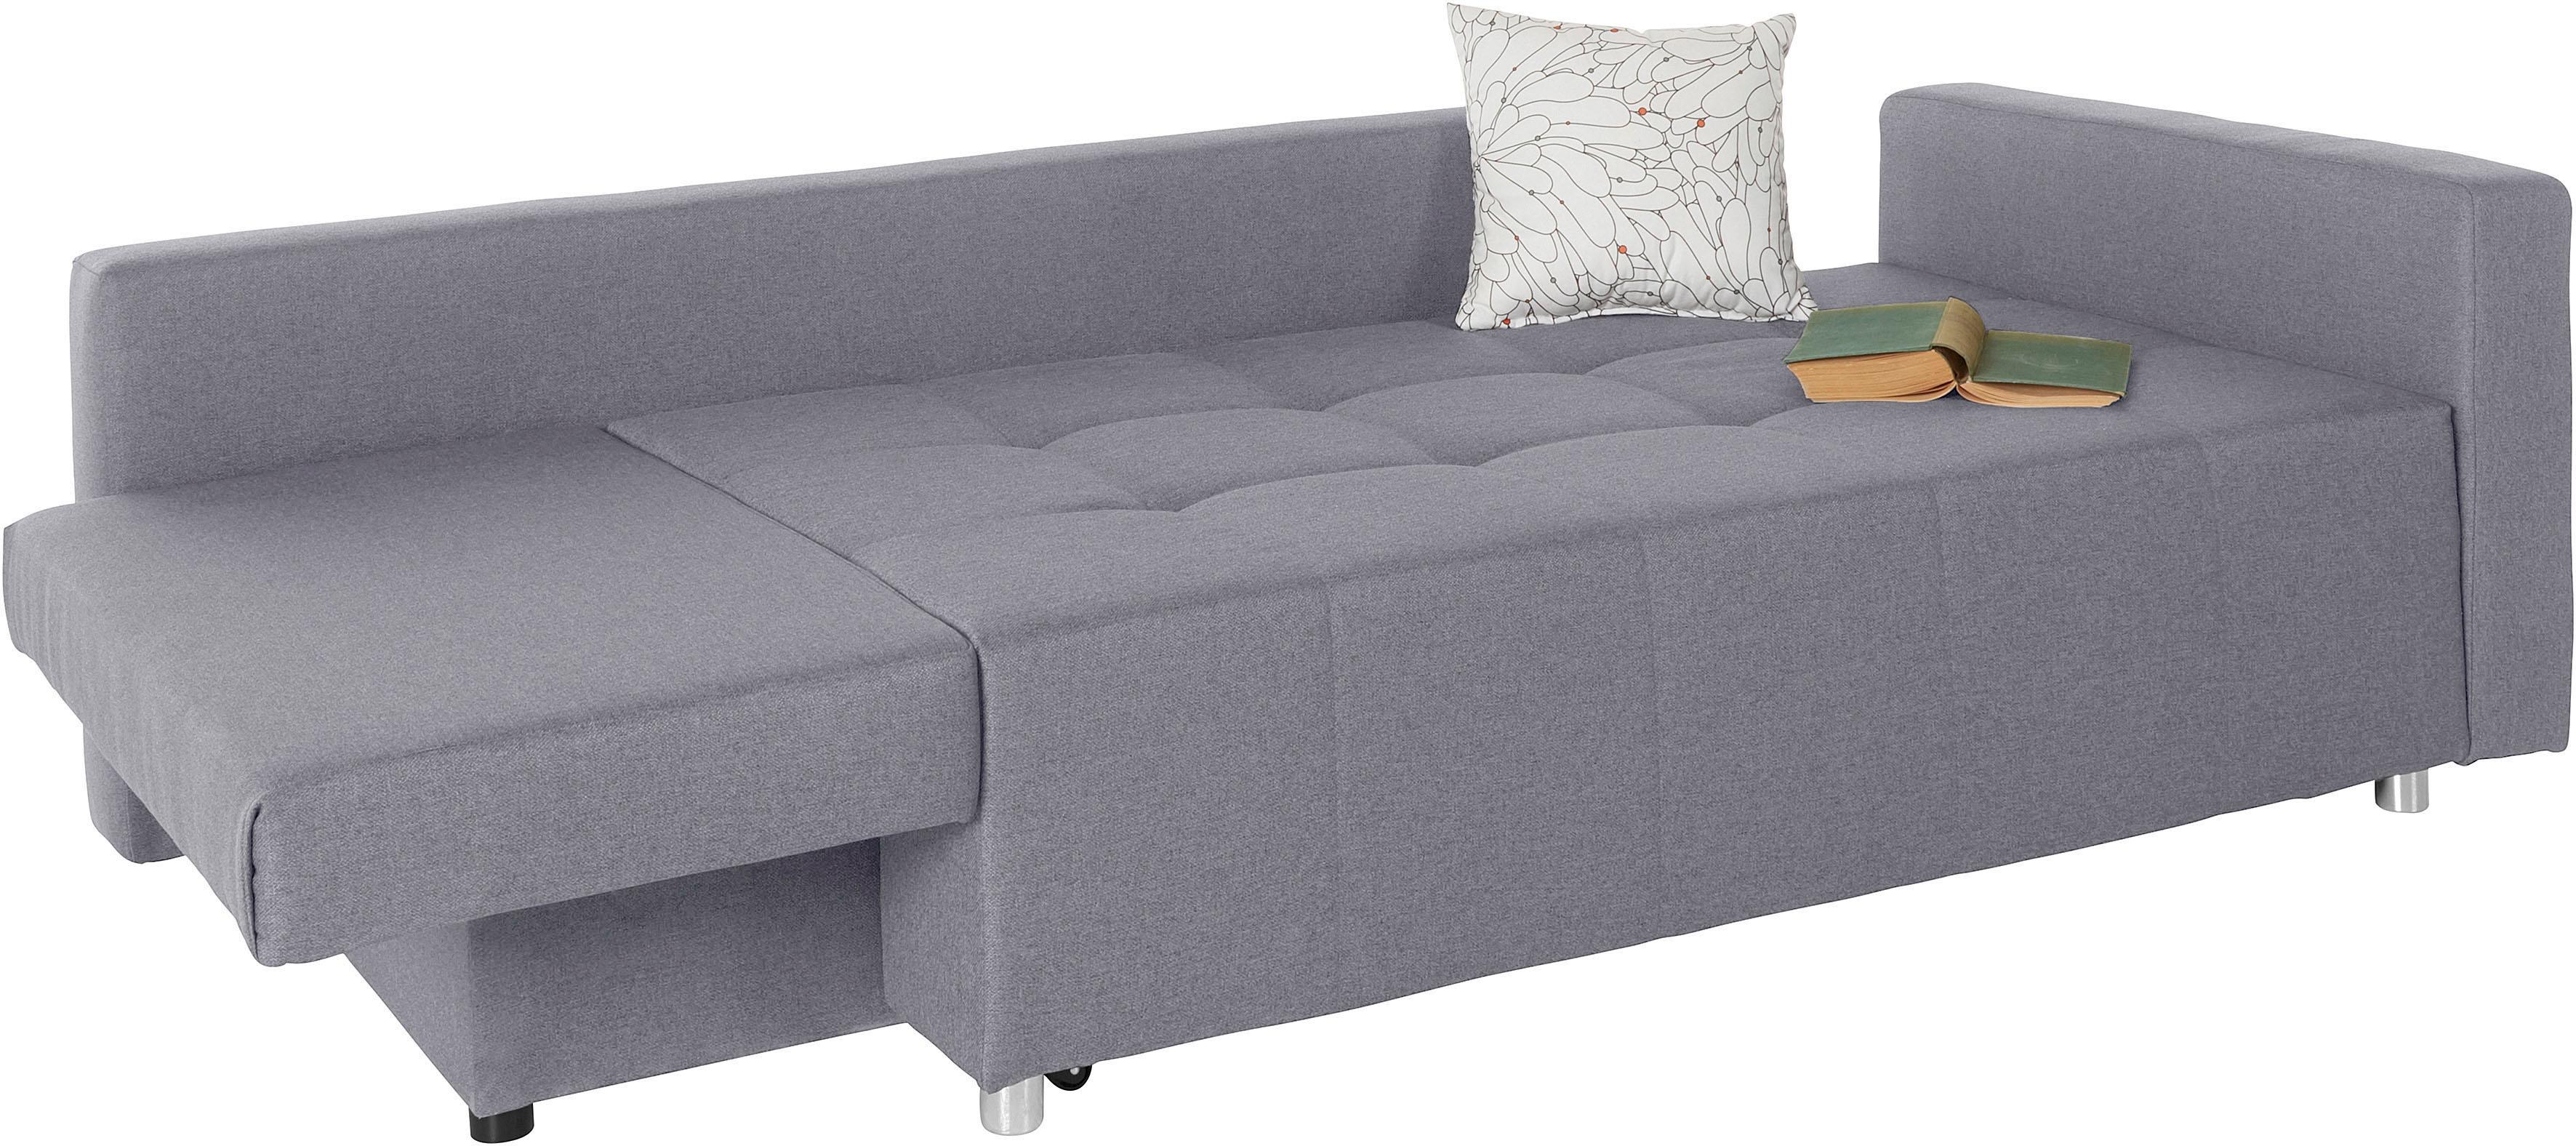 COLLECTION AB Schlafsofa "Dany" 3